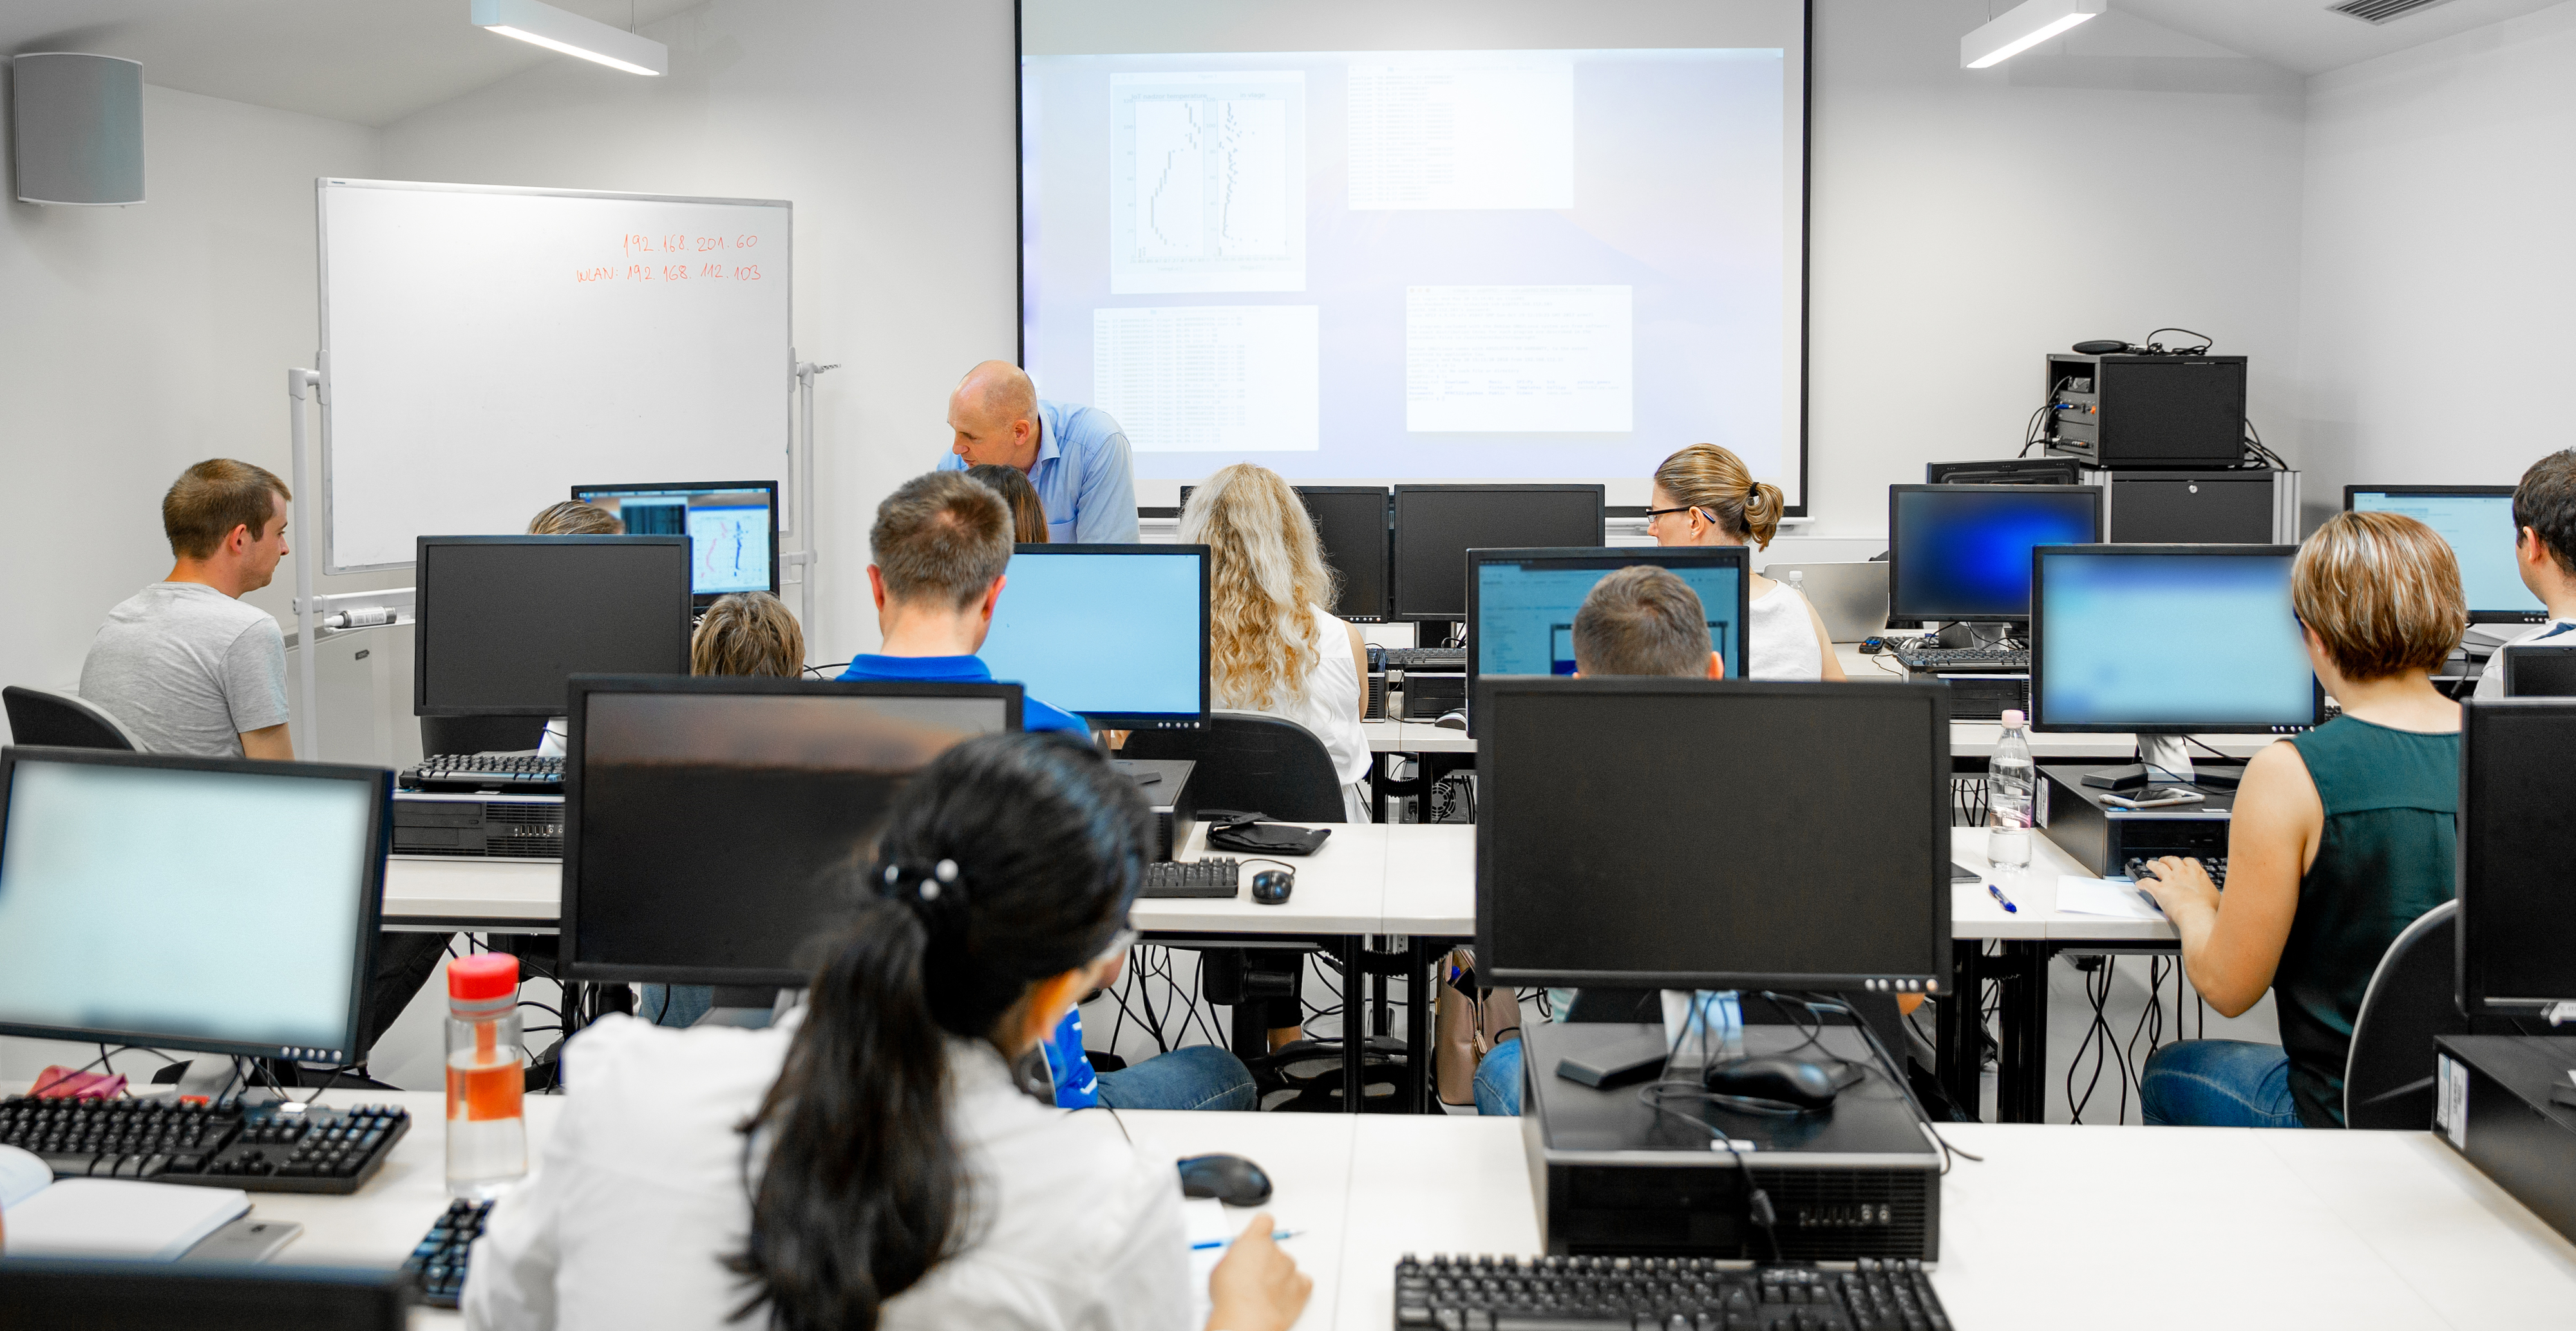 A group of people is seated in a training room at computer workstations, listening to an instructor at the front of the room